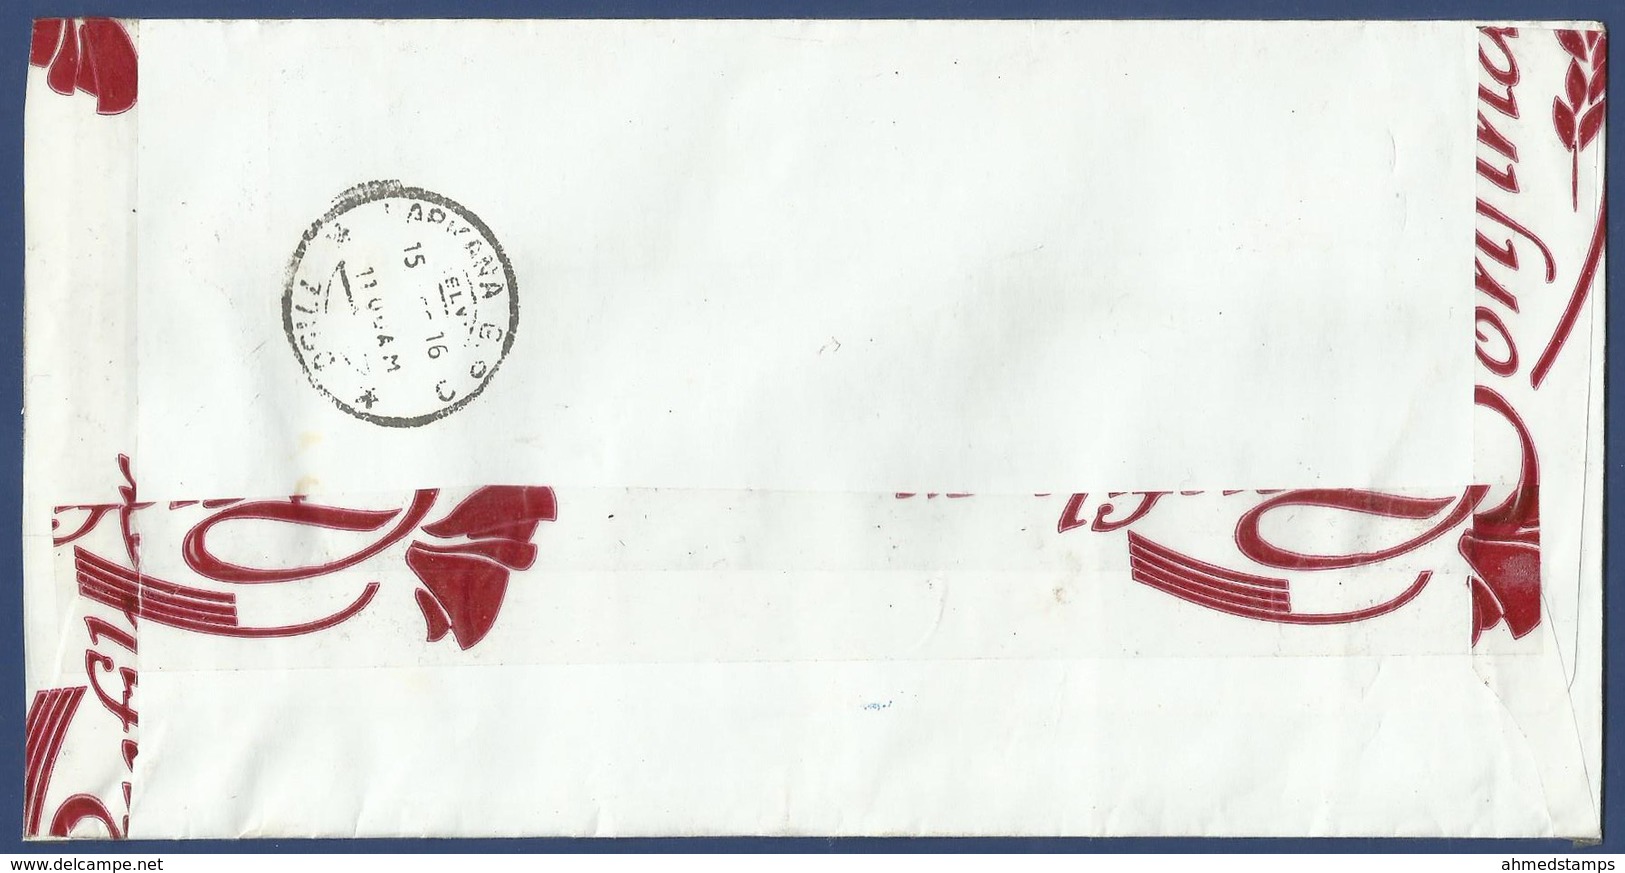 REGISTERED POSTAL USED AIRMAIL COVER TO PAKISTAN - America (Other)